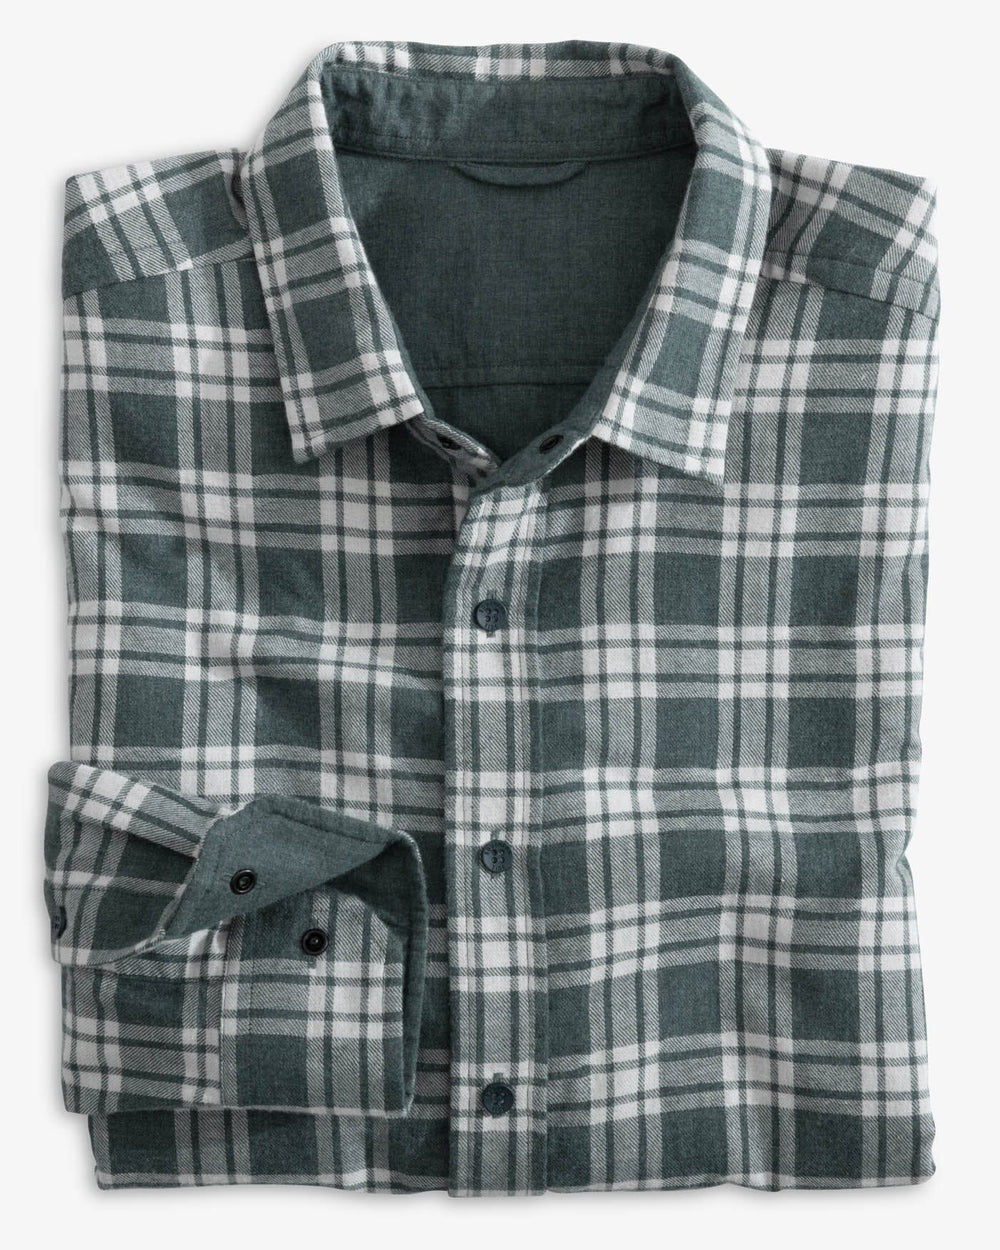 The front view of the Southern Tide Heather Melbourne Reversible Plaid Sport Shirt by Southern Tide - Heather Dark Slate